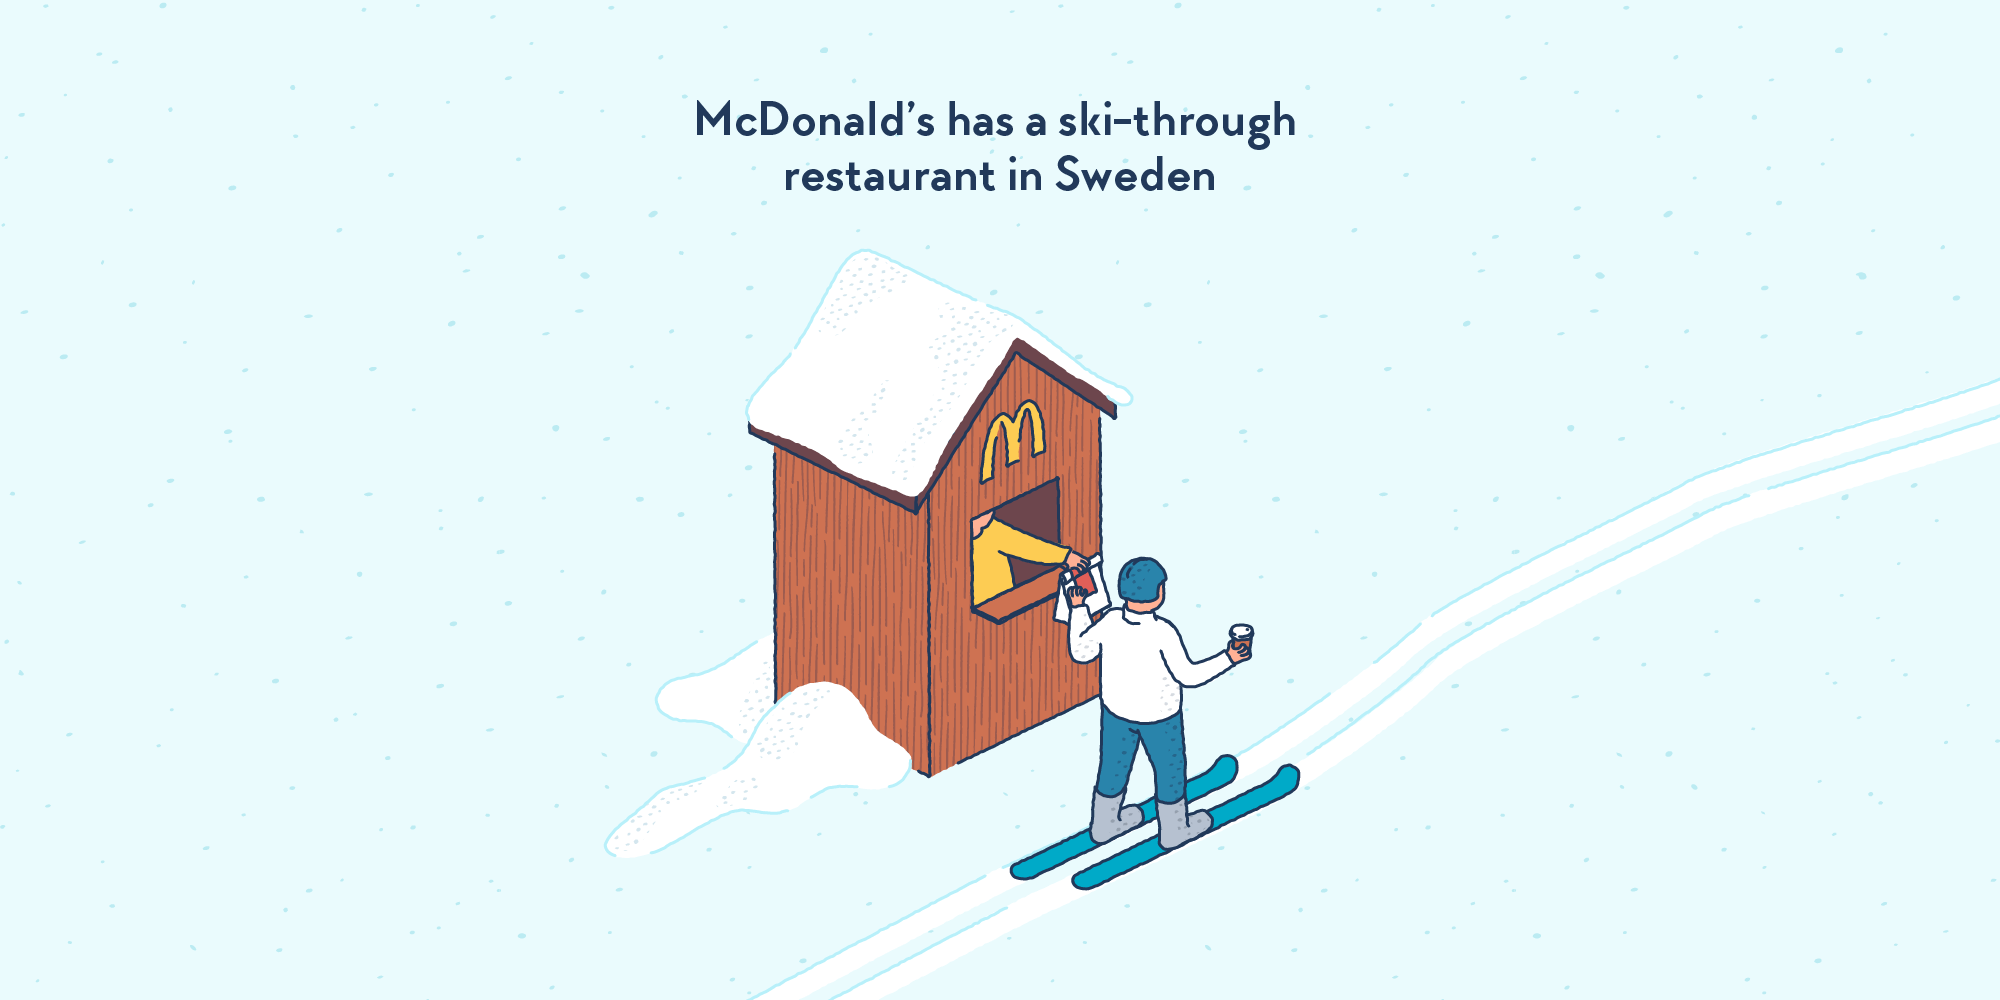 A skier picking up an order from a small wooden cabin in the middle of the snow, carrying the McDonald’s M logo.